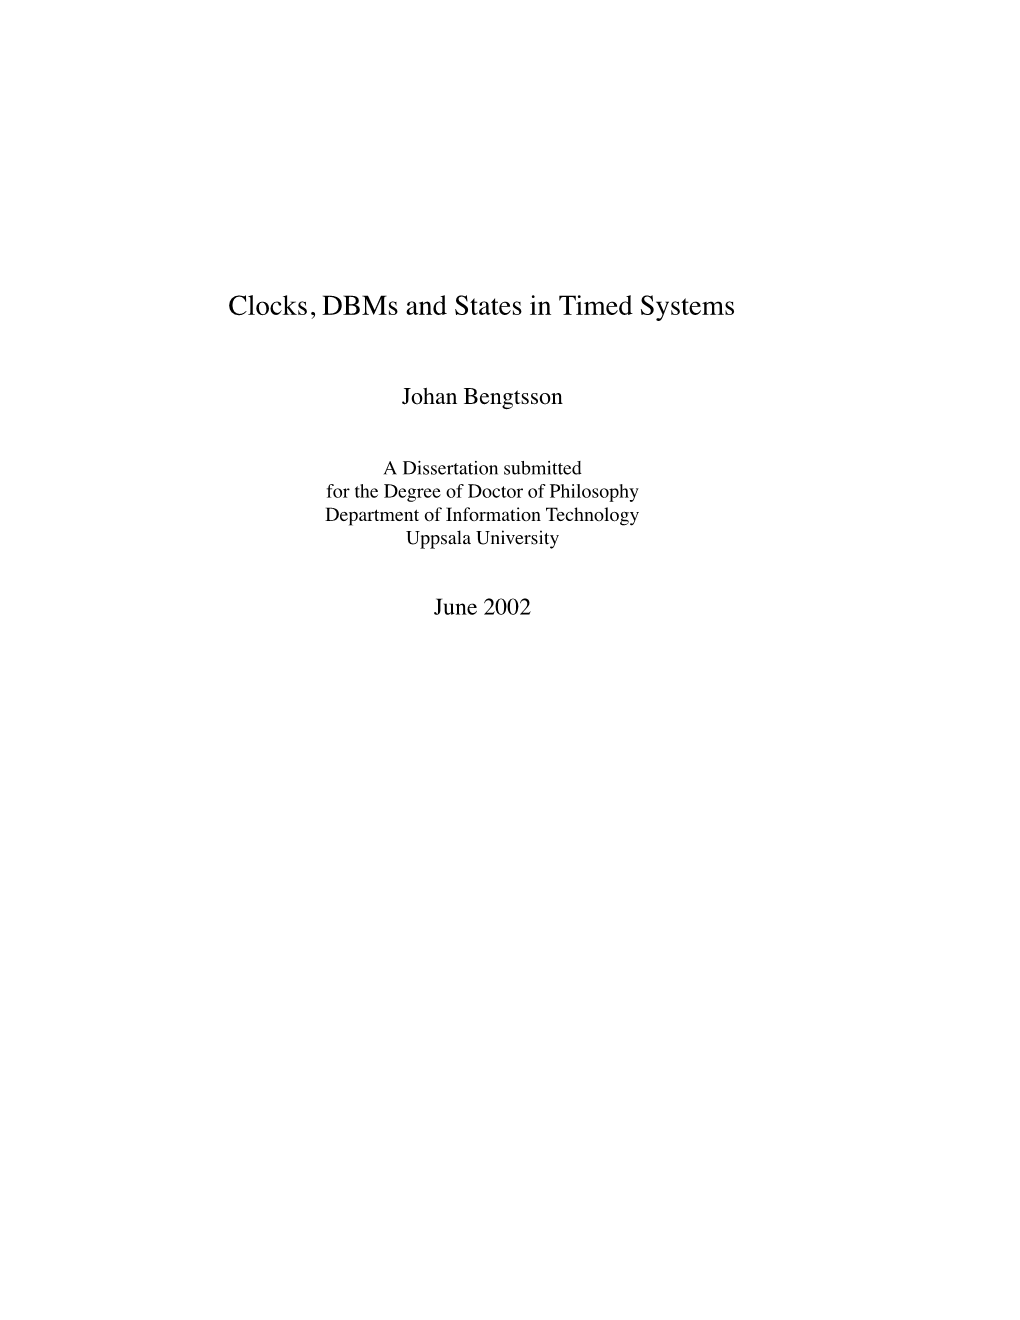 Clocks, Dbms and States in Timed Systems